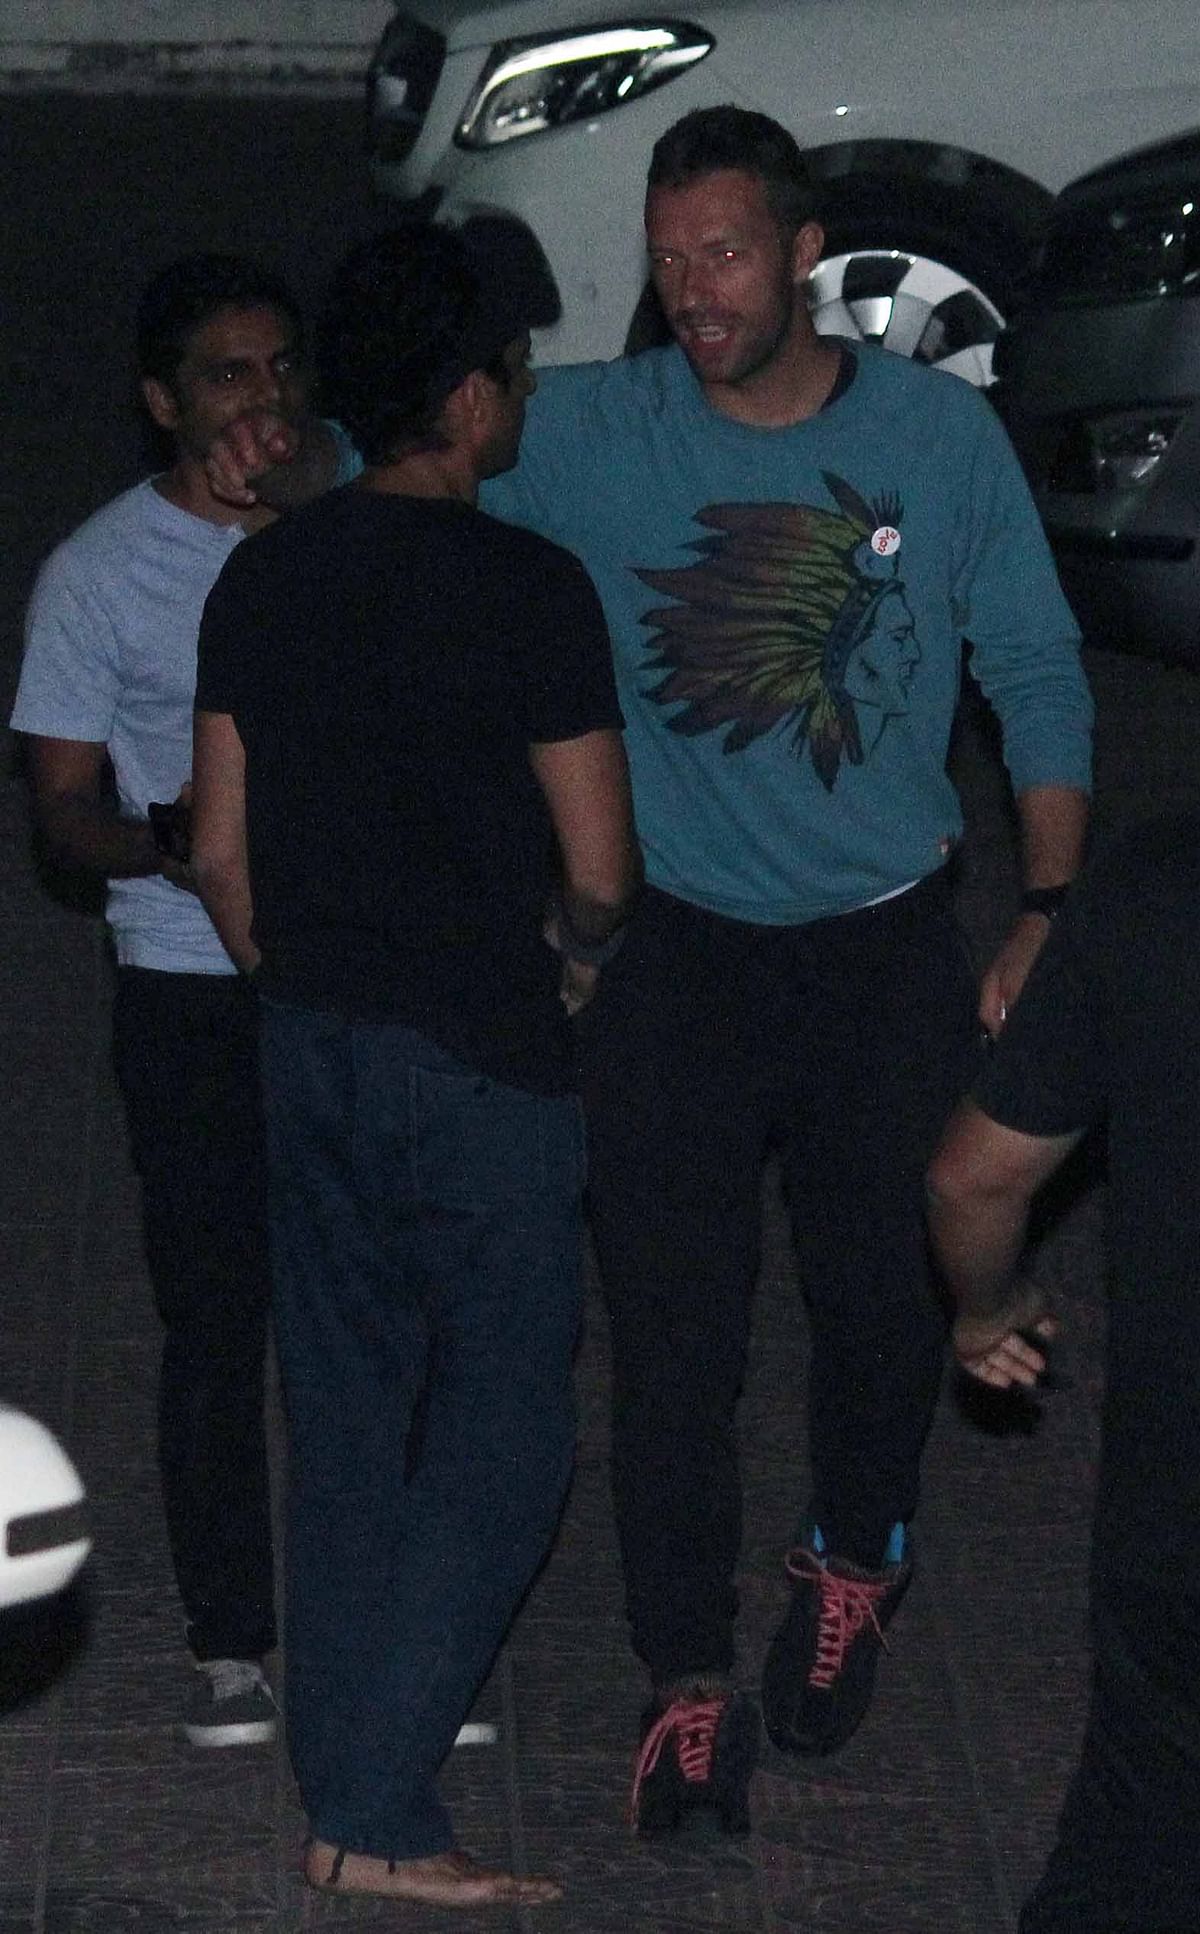 Check out how Farhan Akhtar’s partied away with Chris Martin, Zoya Akhtar and Kiran Rao.